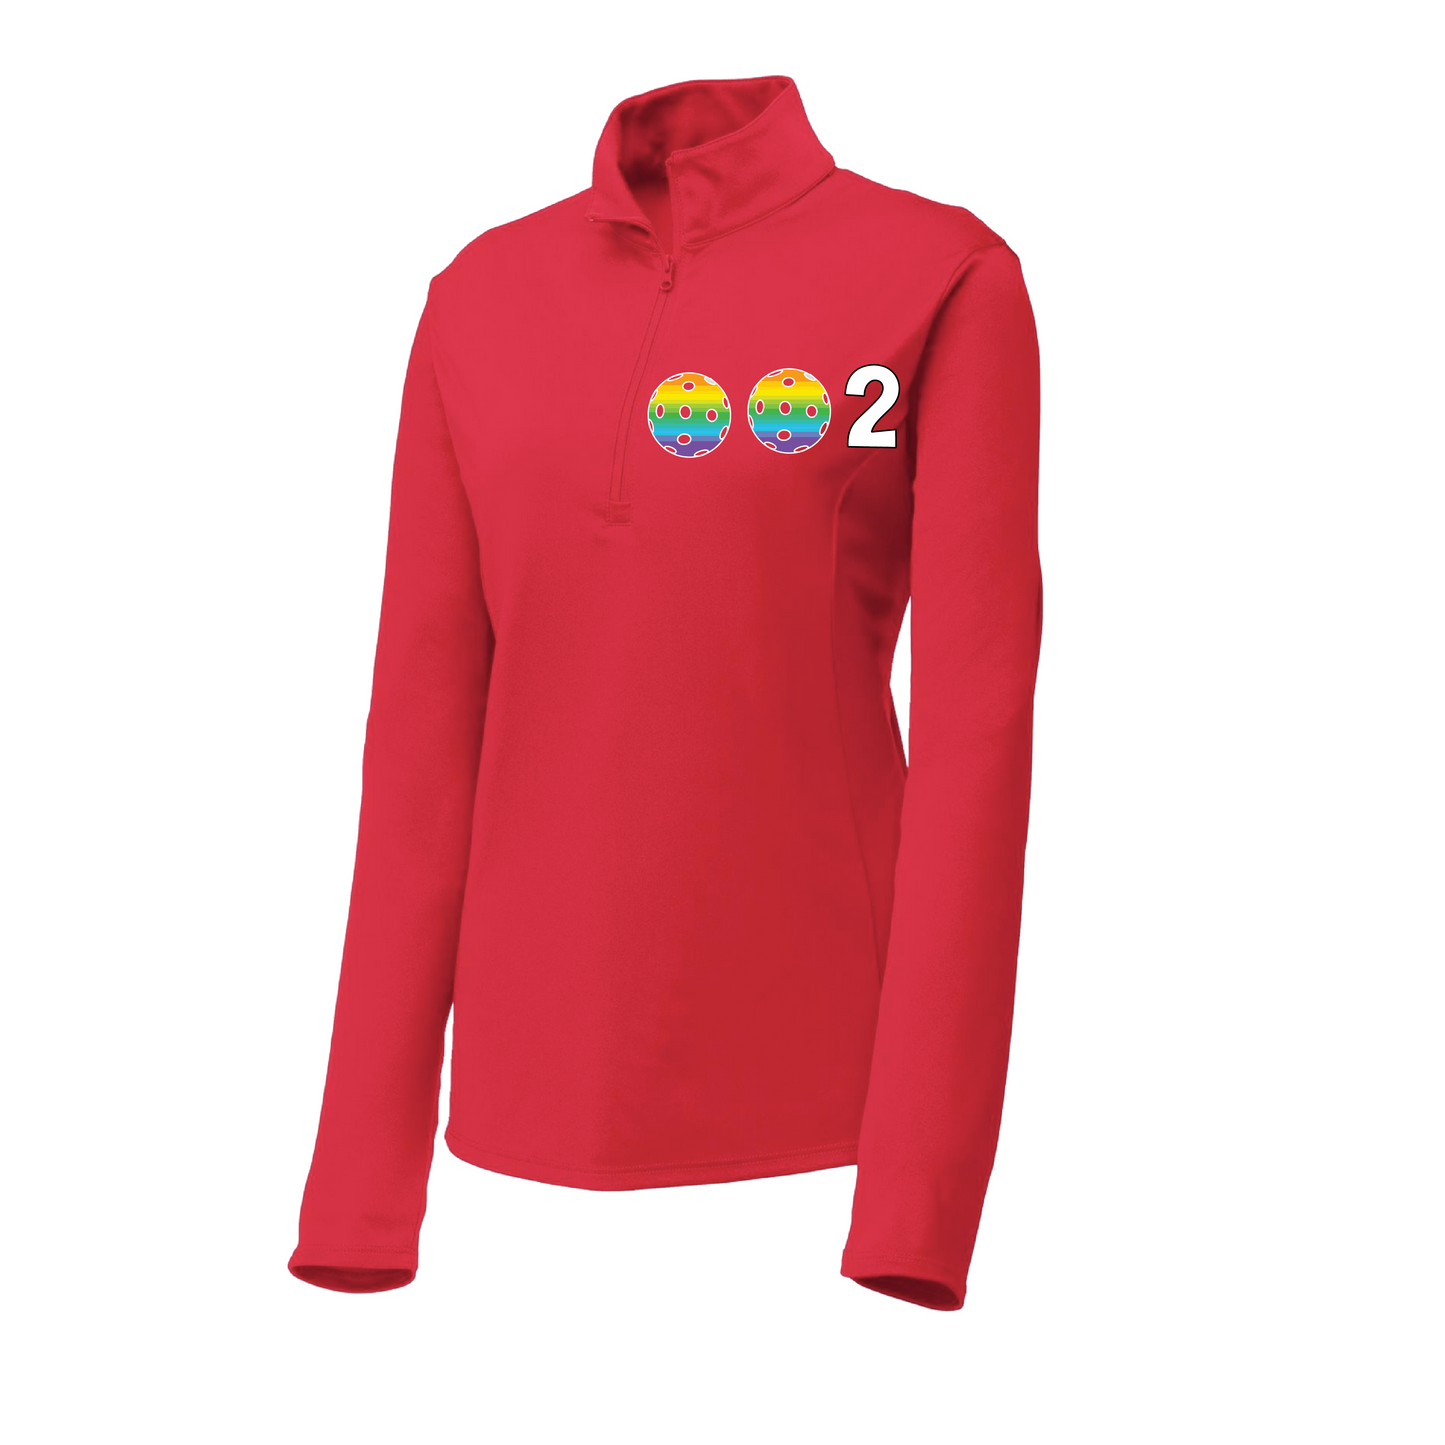 002 With Pickleballs (Colors Purple Rainbow Green) | Women's 1/4 Zip Pullover Athletic Shirt | 100% Polyester